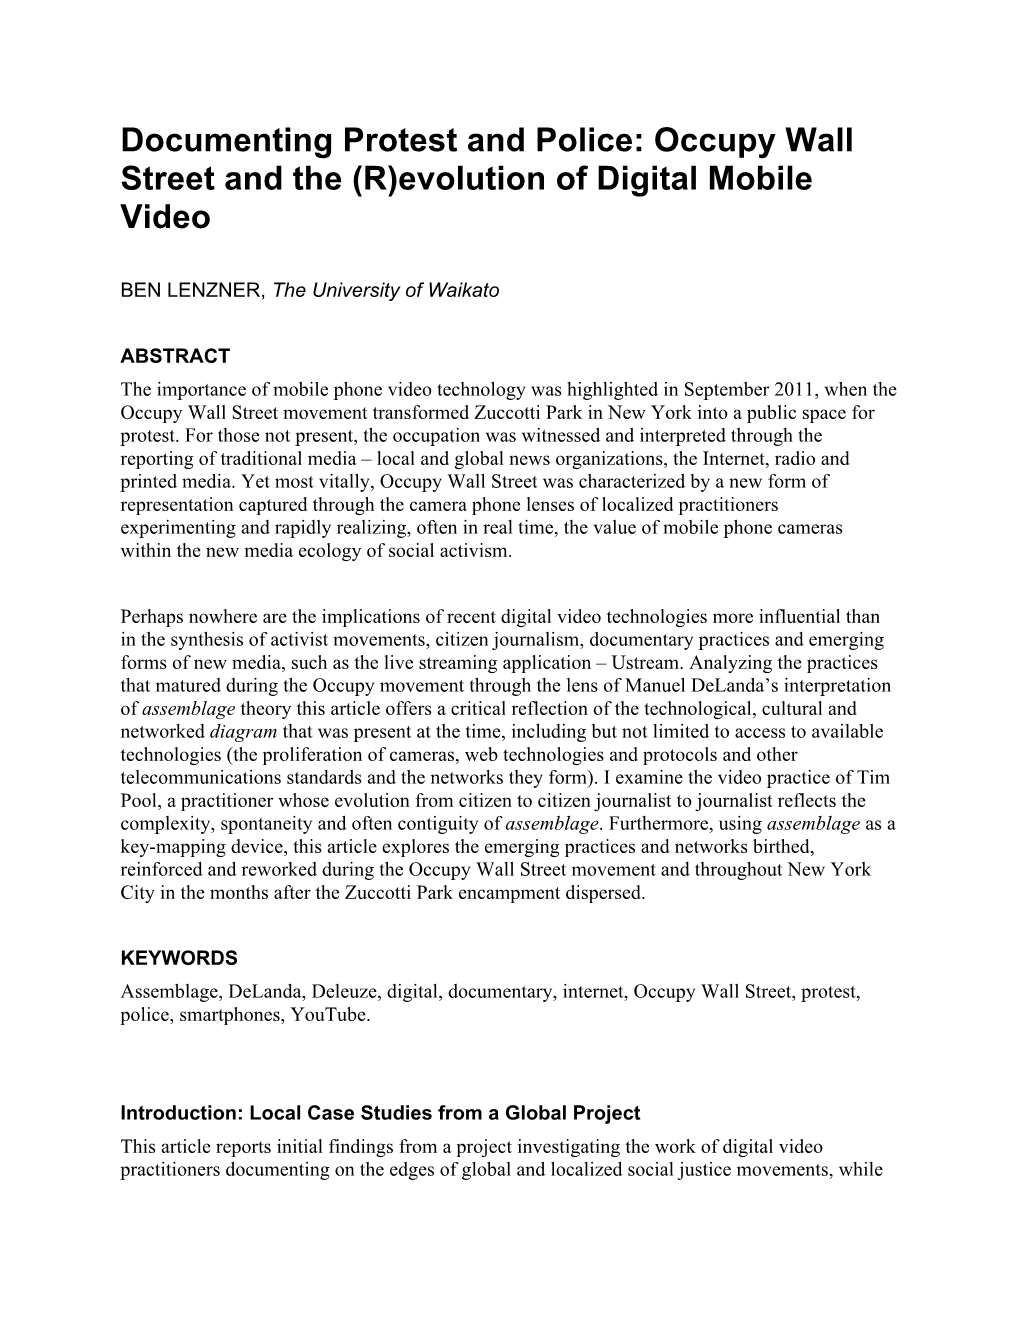 Documenting Protest and Police: Occupy Wall Street and the (R)Evolution of Digital Mobile Video